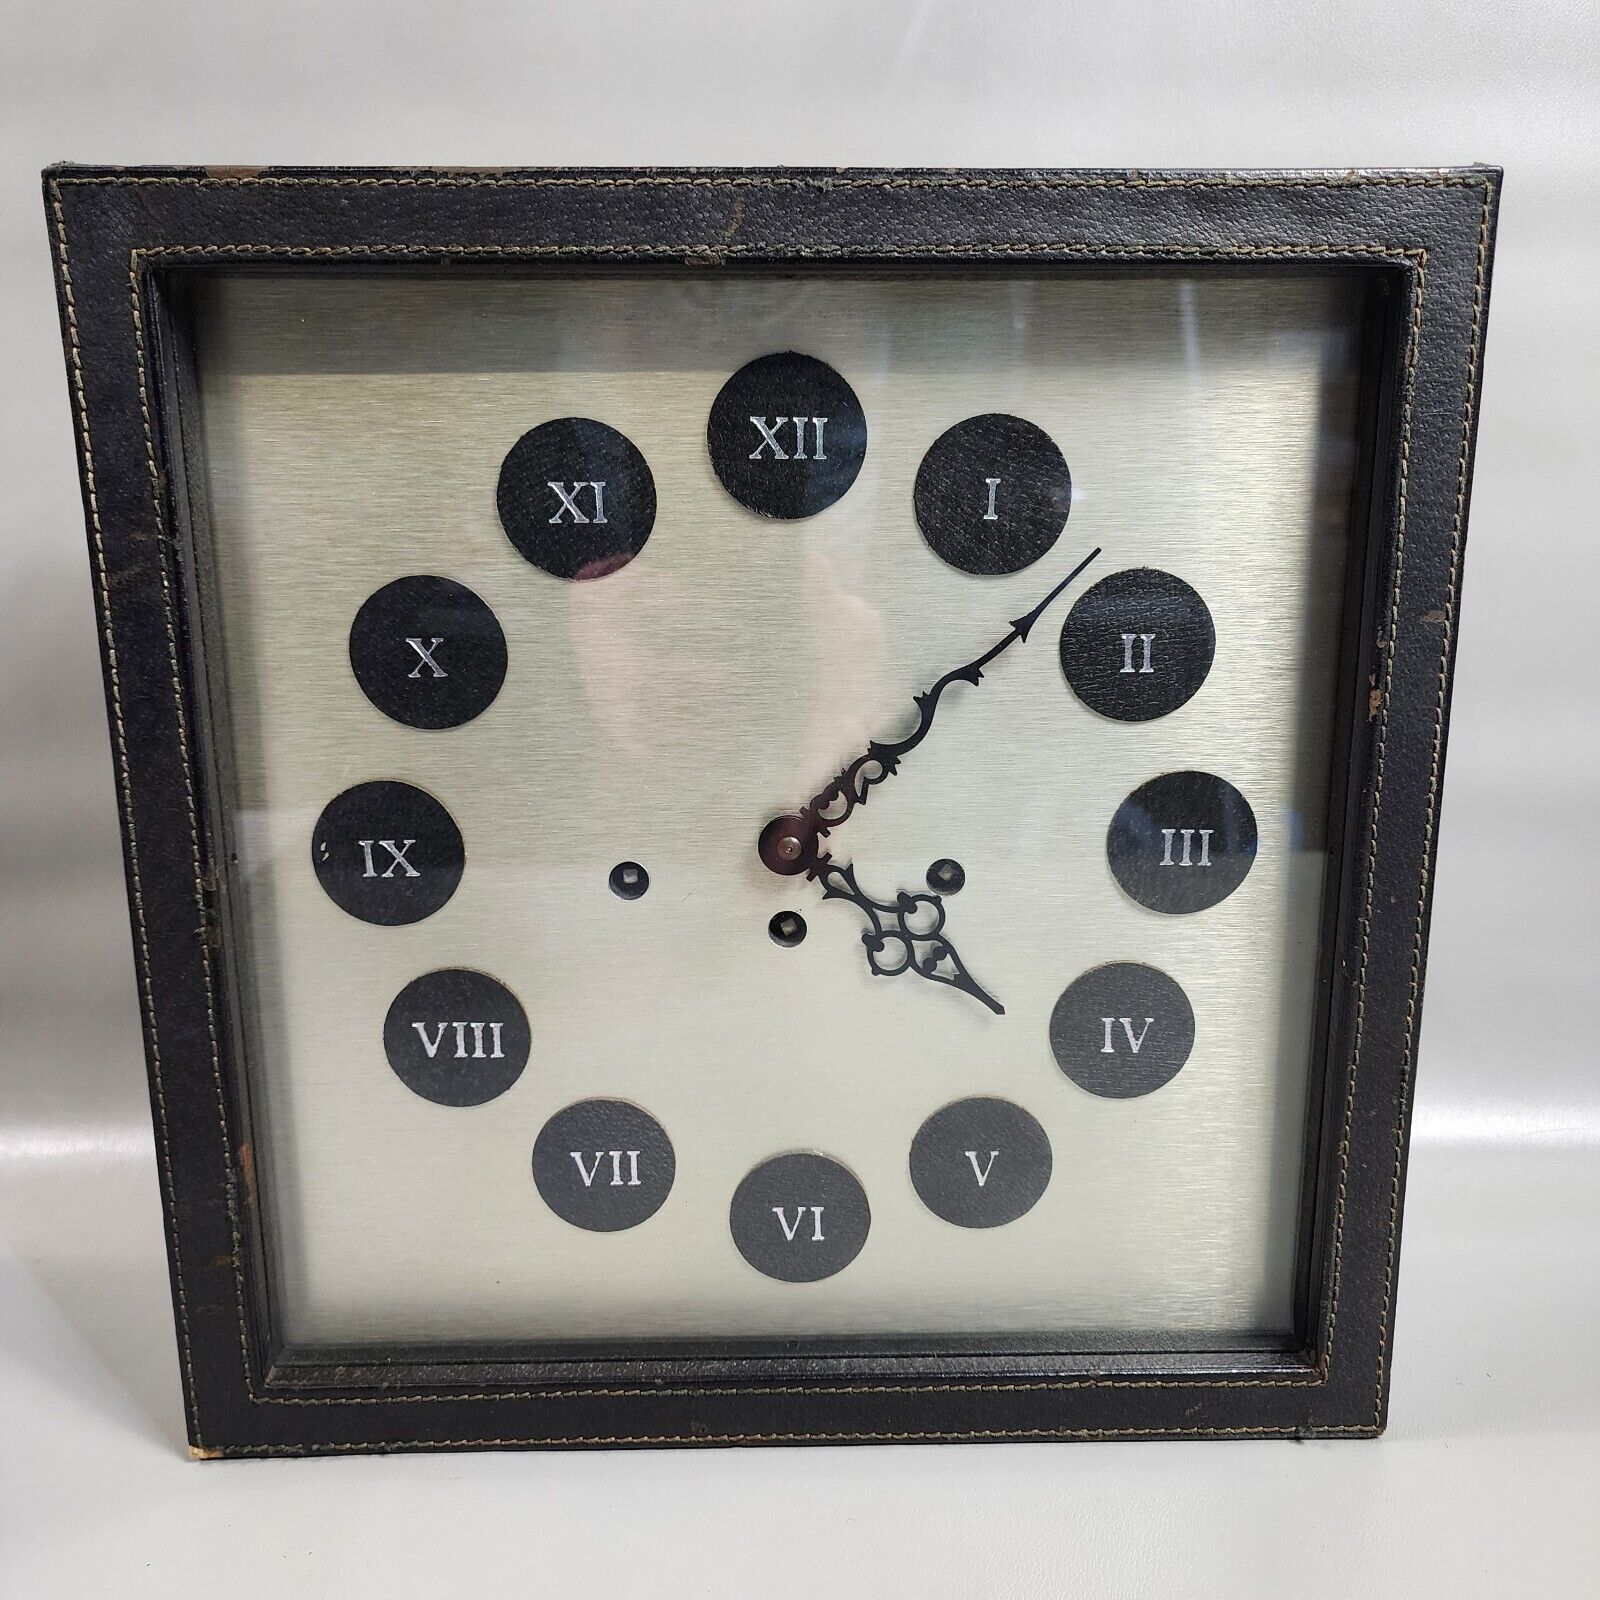 Vintage Dunhill Wall Clock Kienzle Chiming Key Wind Movement Made In Italy